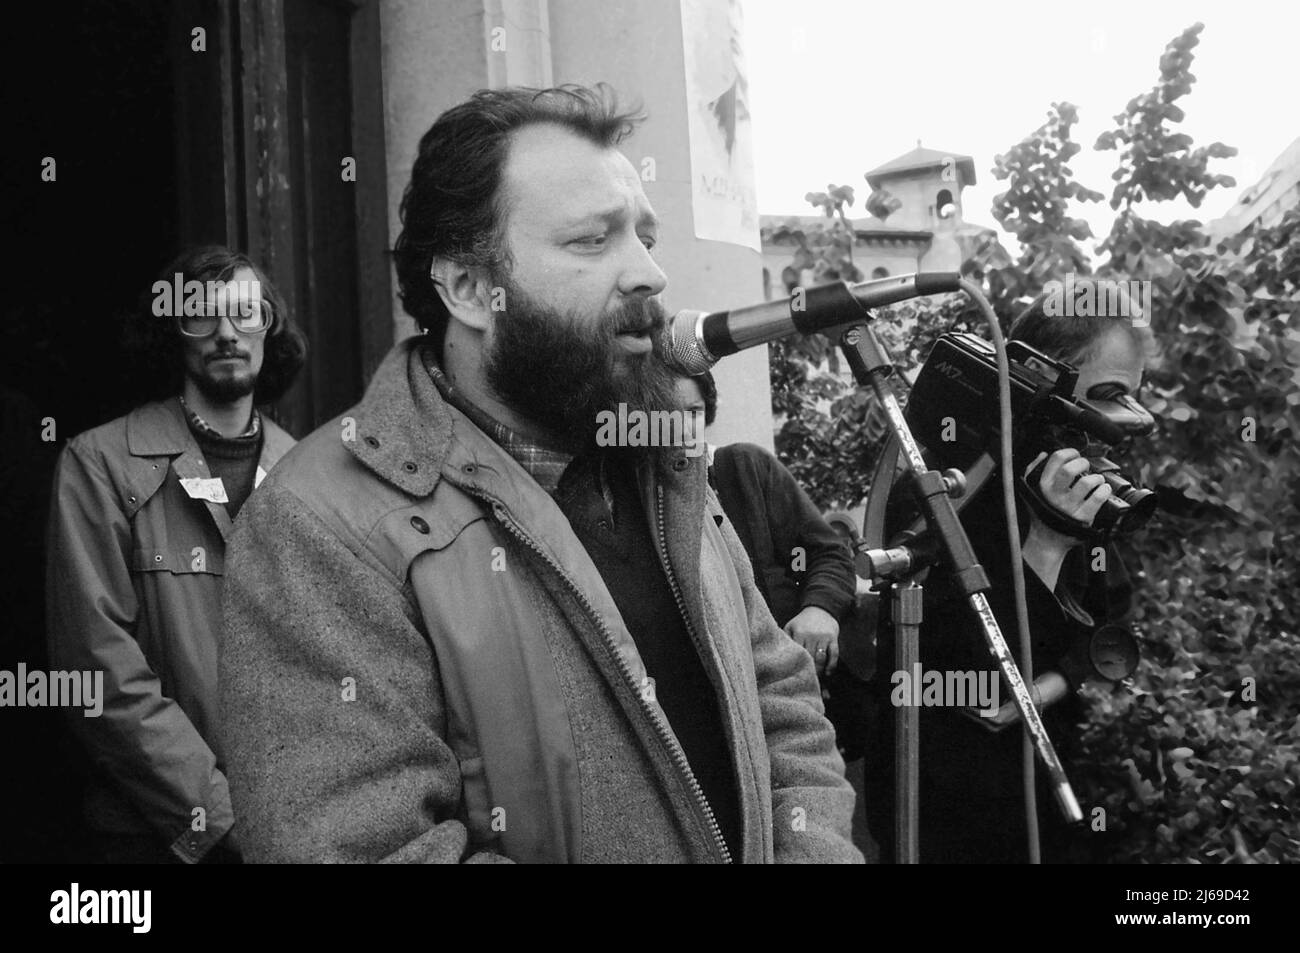 Bucharest, Romania, April 1990. Writer & political figure Stelian Tanase speaking from the famous balcony of the University building, during 'Golaniada', a major anti-communism protest in Piata Universitatii, following the Romanian Revolution of 1989. Behind him, then journalist Cătălin Harnagea, later director of the Foreign Intelligence Service. Stock Photo